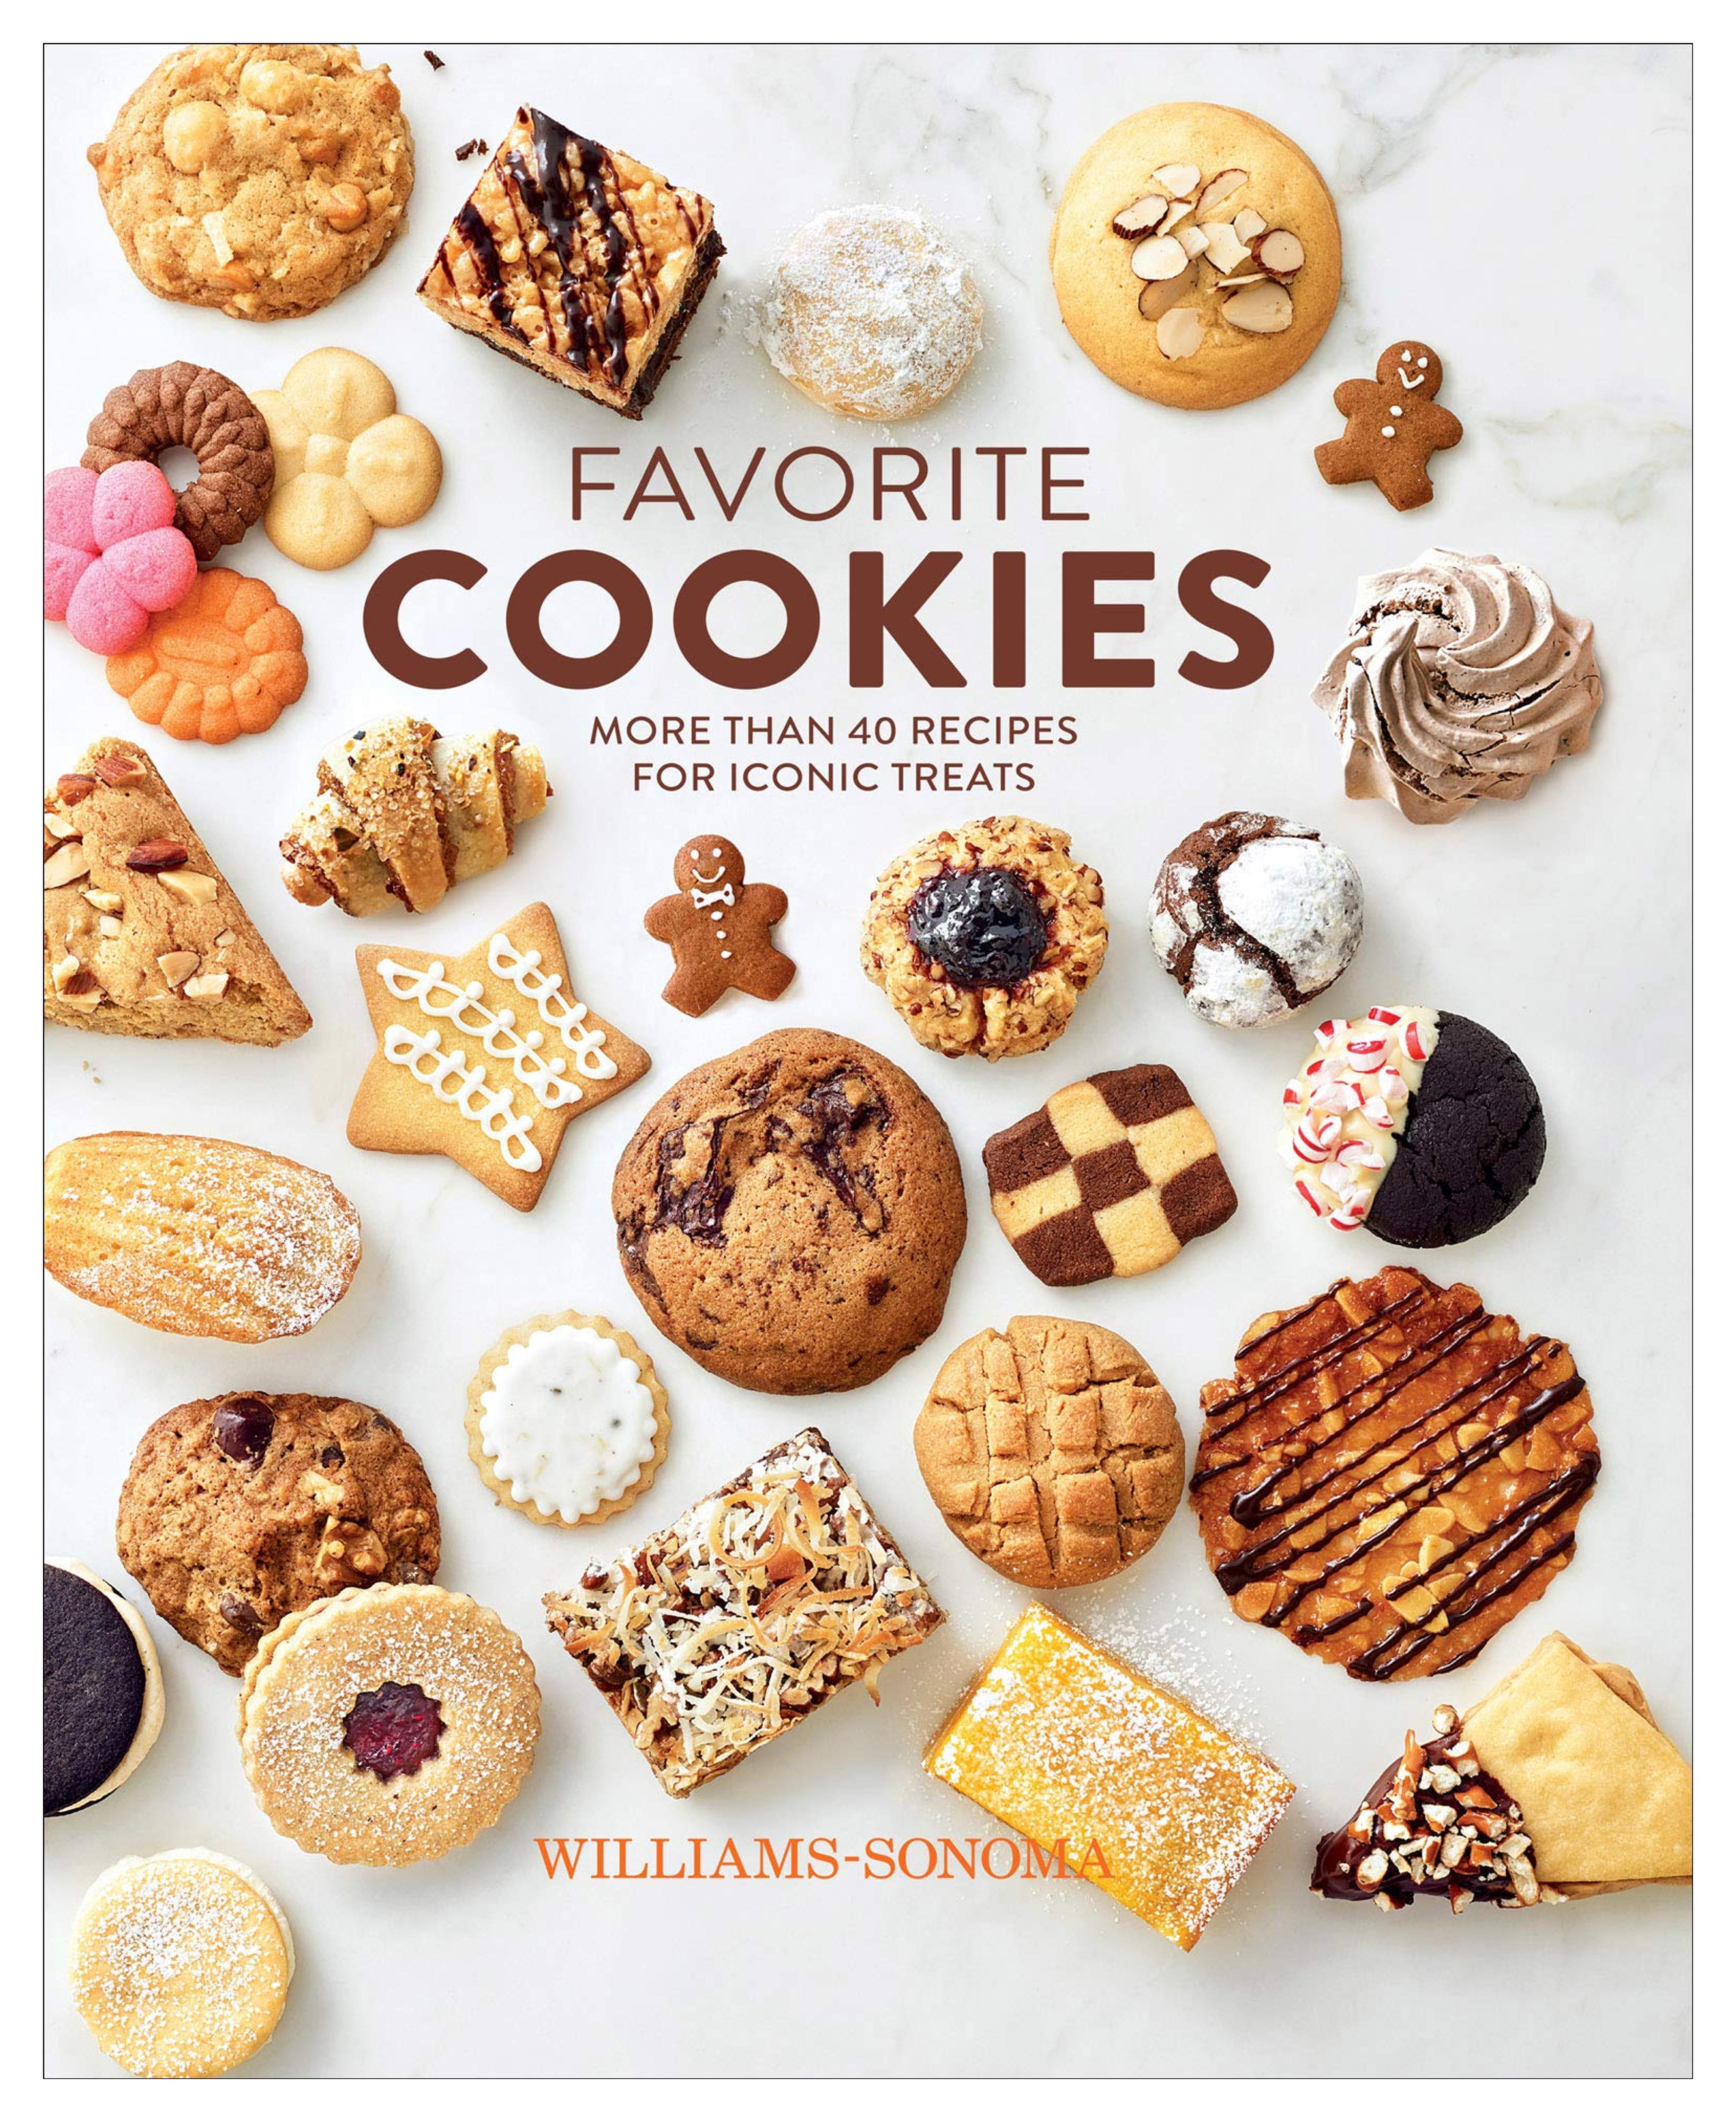 Favorite Cookies: More Than 40 Recipes for Iconic Treats (Williams-Sonoma) - Kindle edition by The Williams-Sonoma Test Kitchen, Breakey, Annabelle. Cookbooks, Food & Wine Kindle eBooks @ Amazon.com.